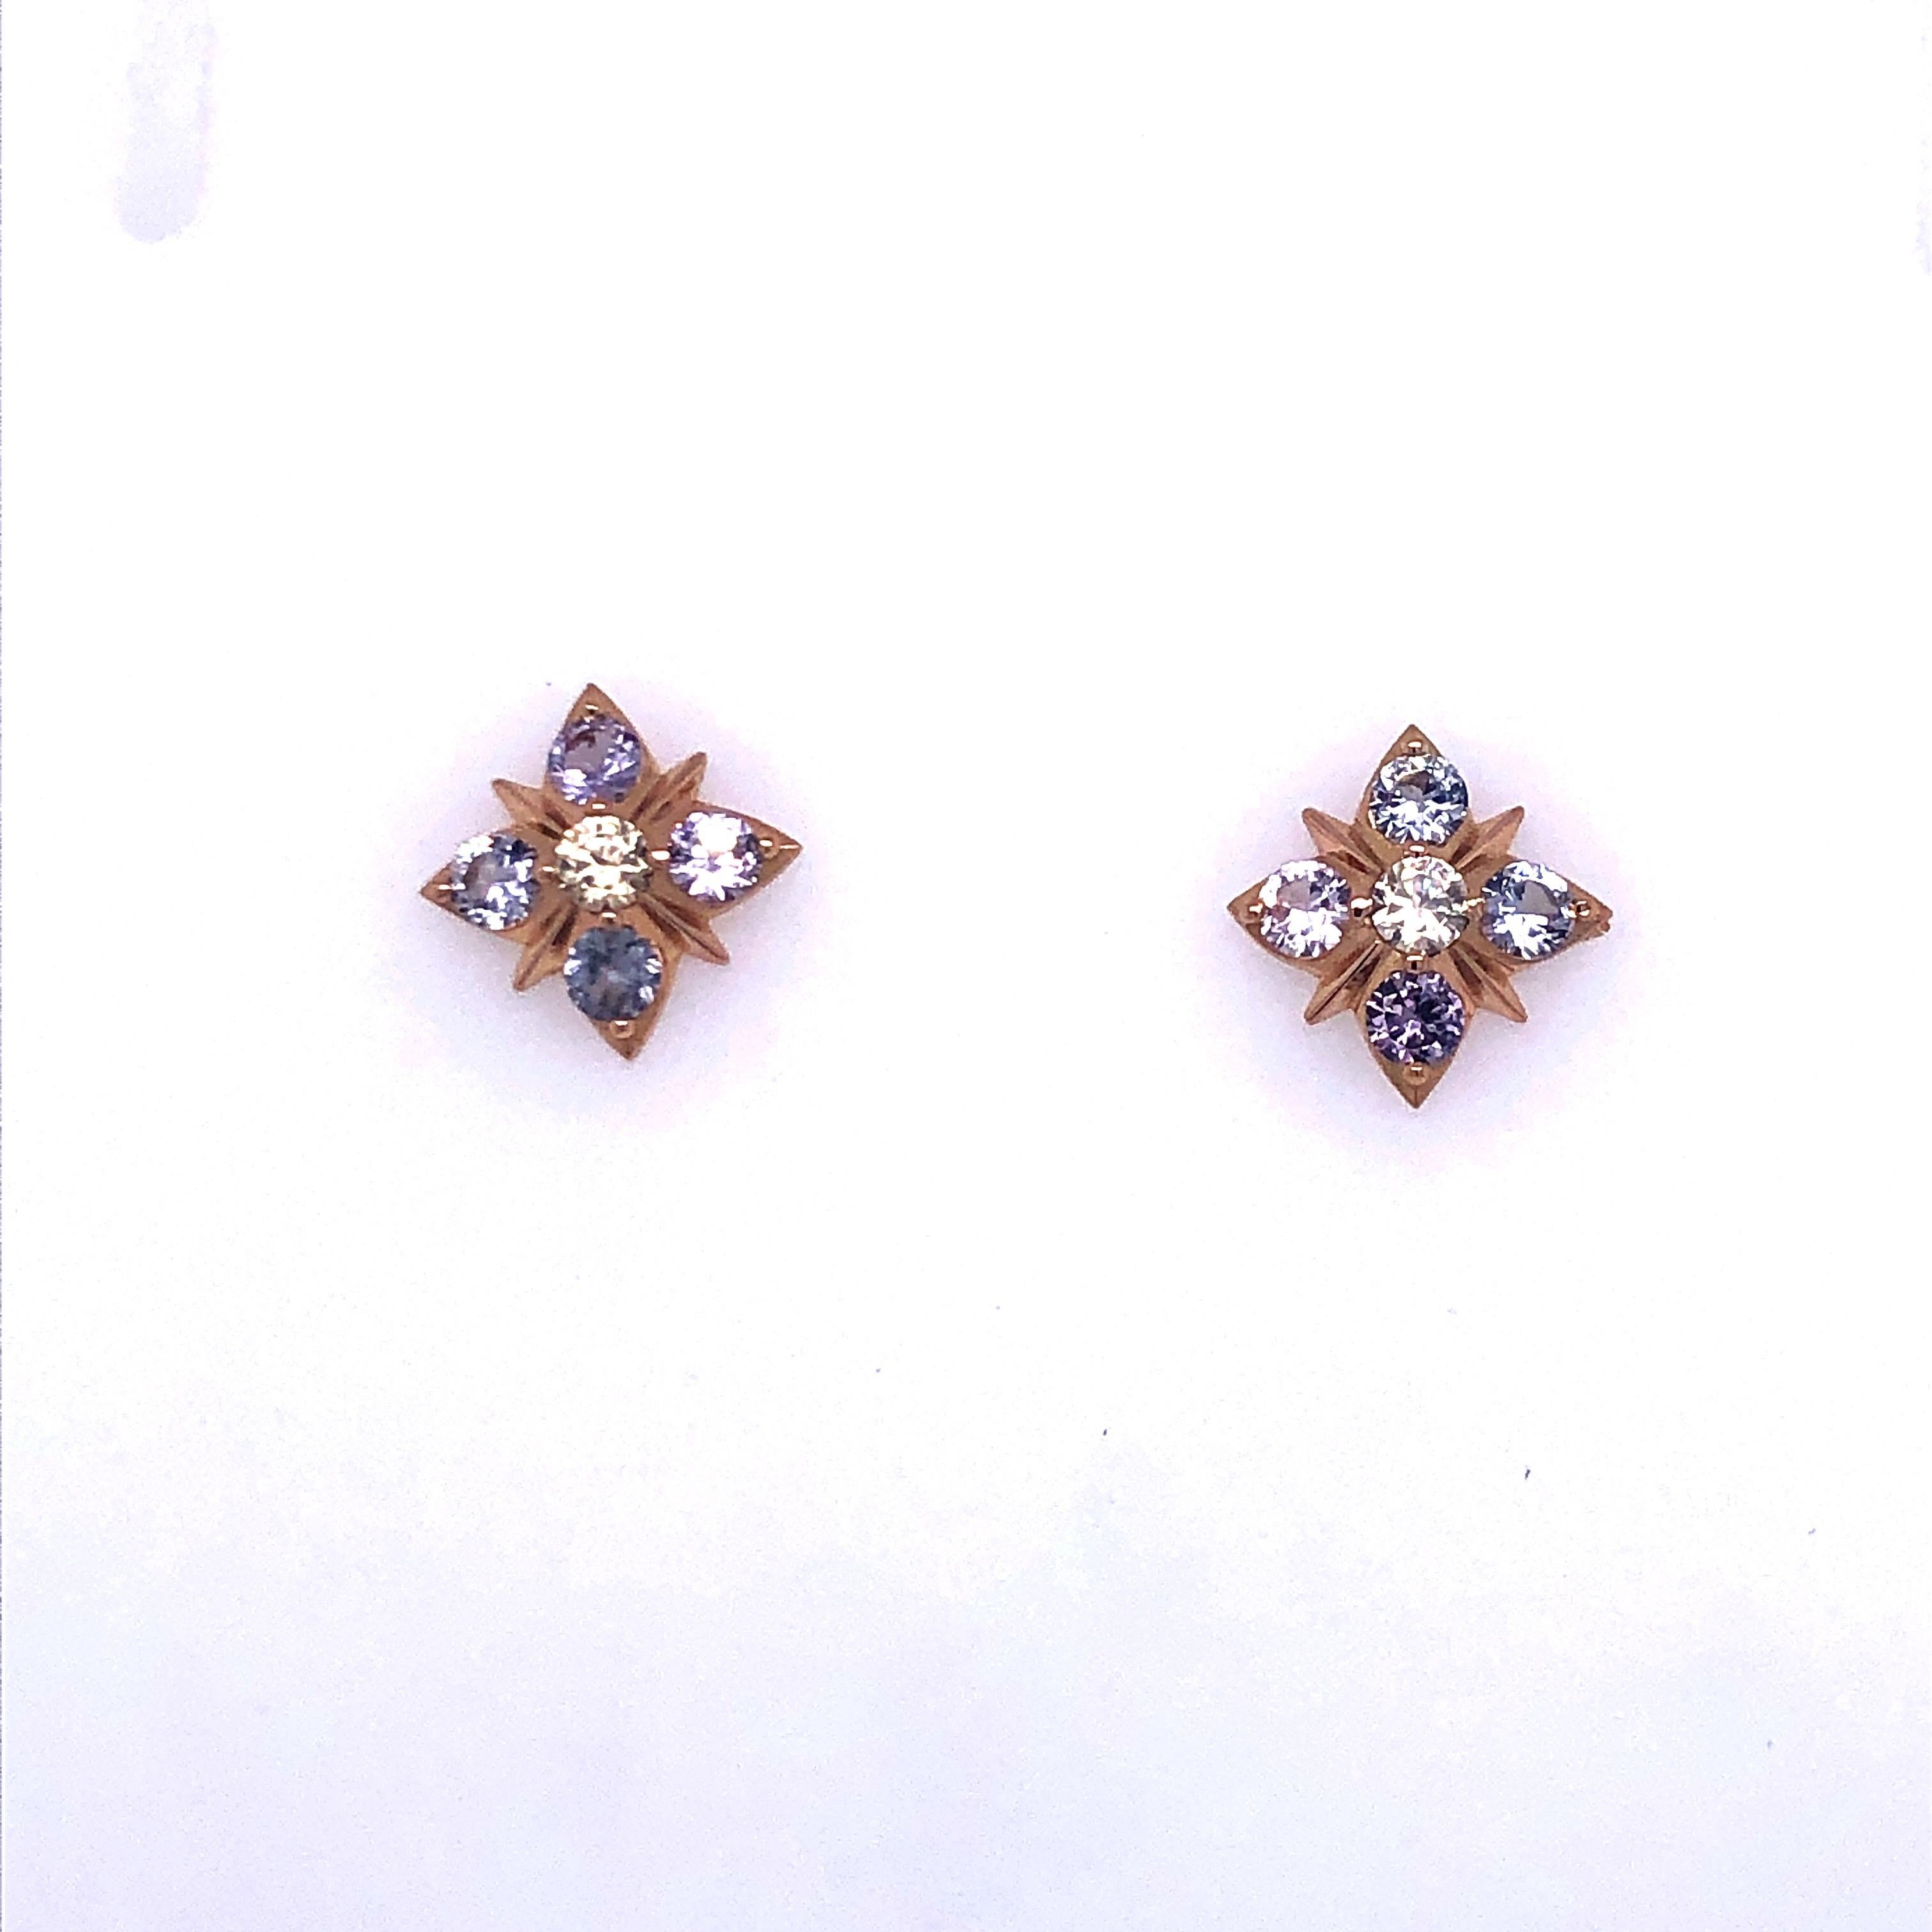 Enchanting Spinel Starburst Earrings from Award Winning Jewelry Designer, Melissa Spencer.  These earrings sparkle and shine and light up your life! 
Four Diamond Cut Spinels in each Rose Gold Starburst Design Stud Earrings.  